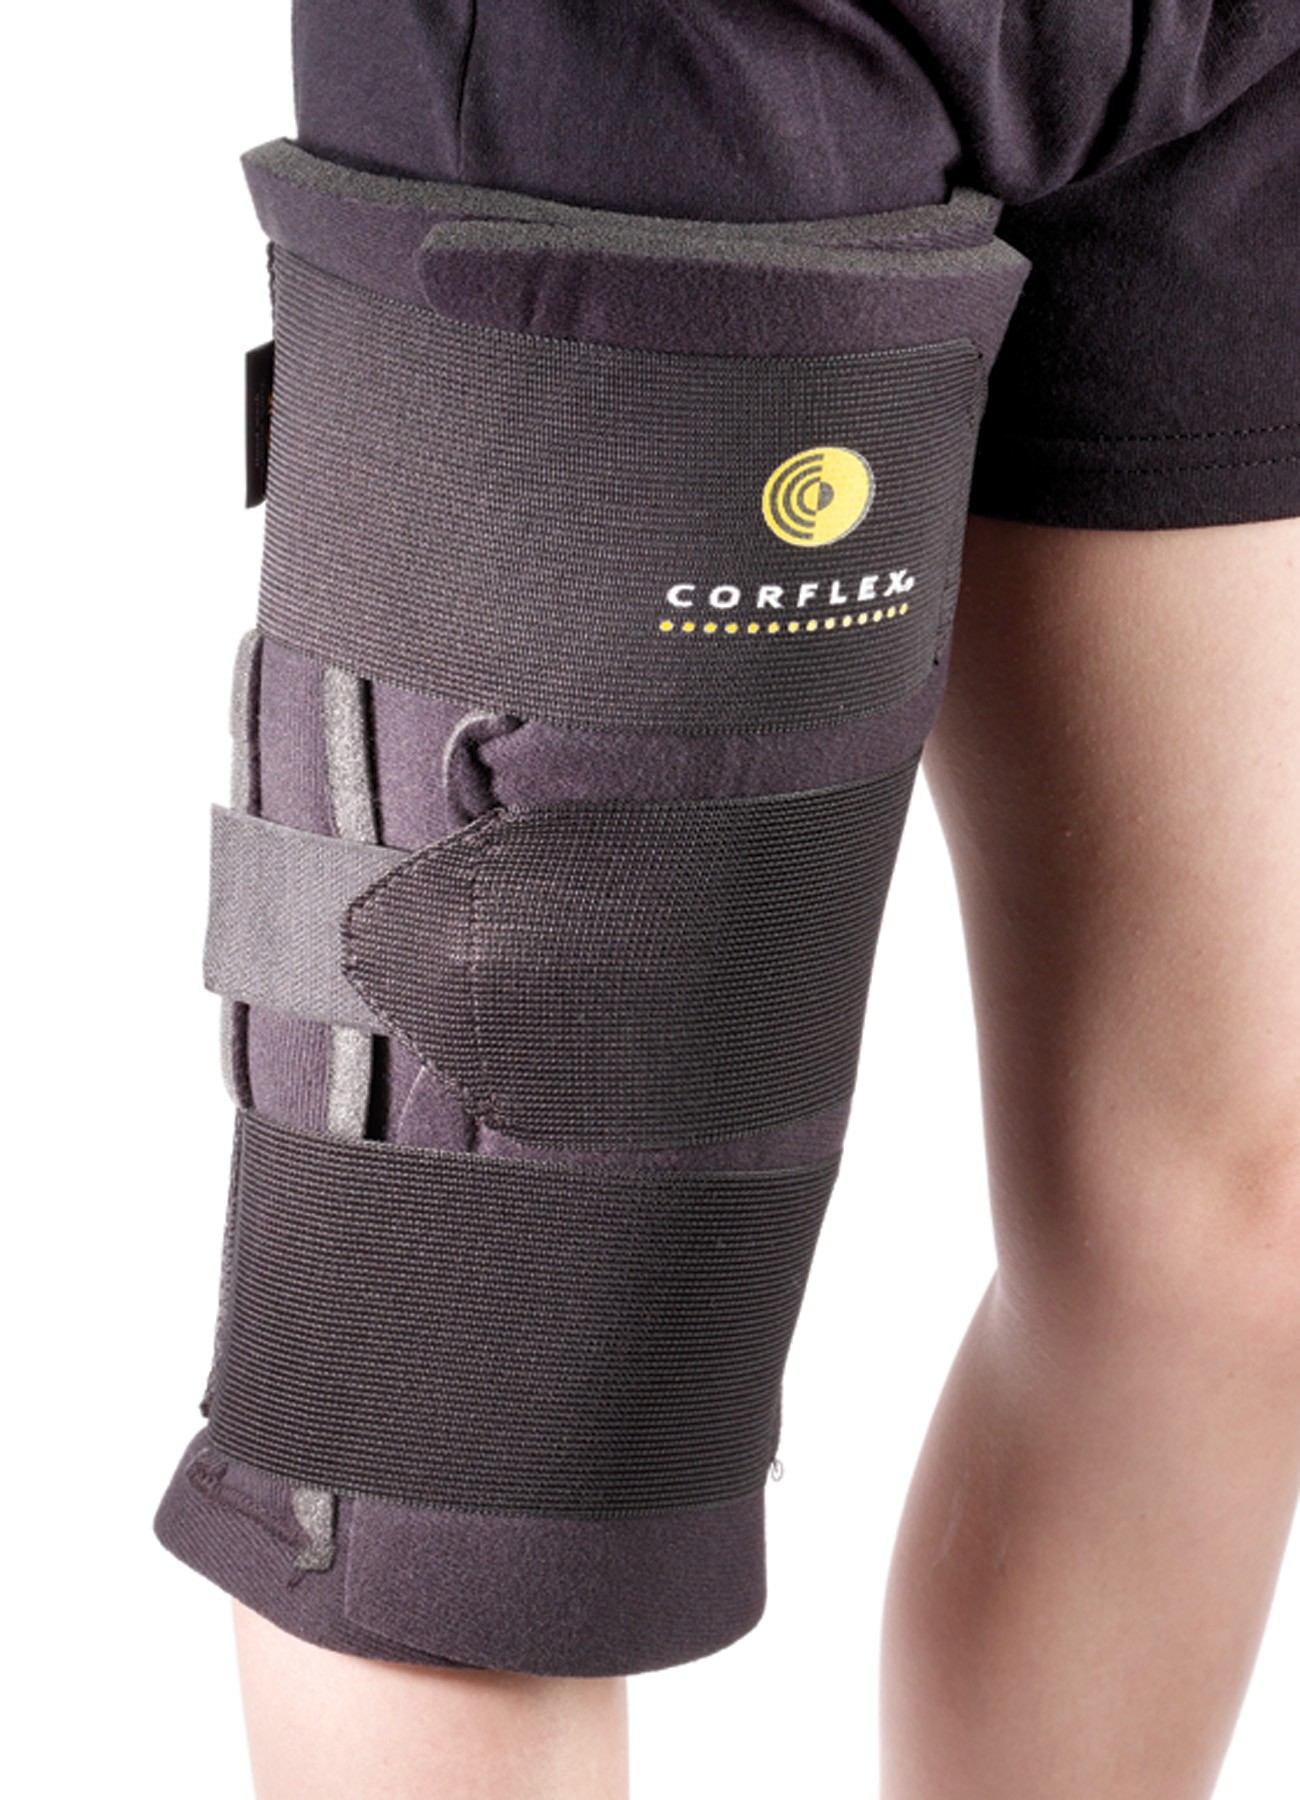 United Ortho® Tri-Panel Knee Immobilizer - Advent Medical Systems